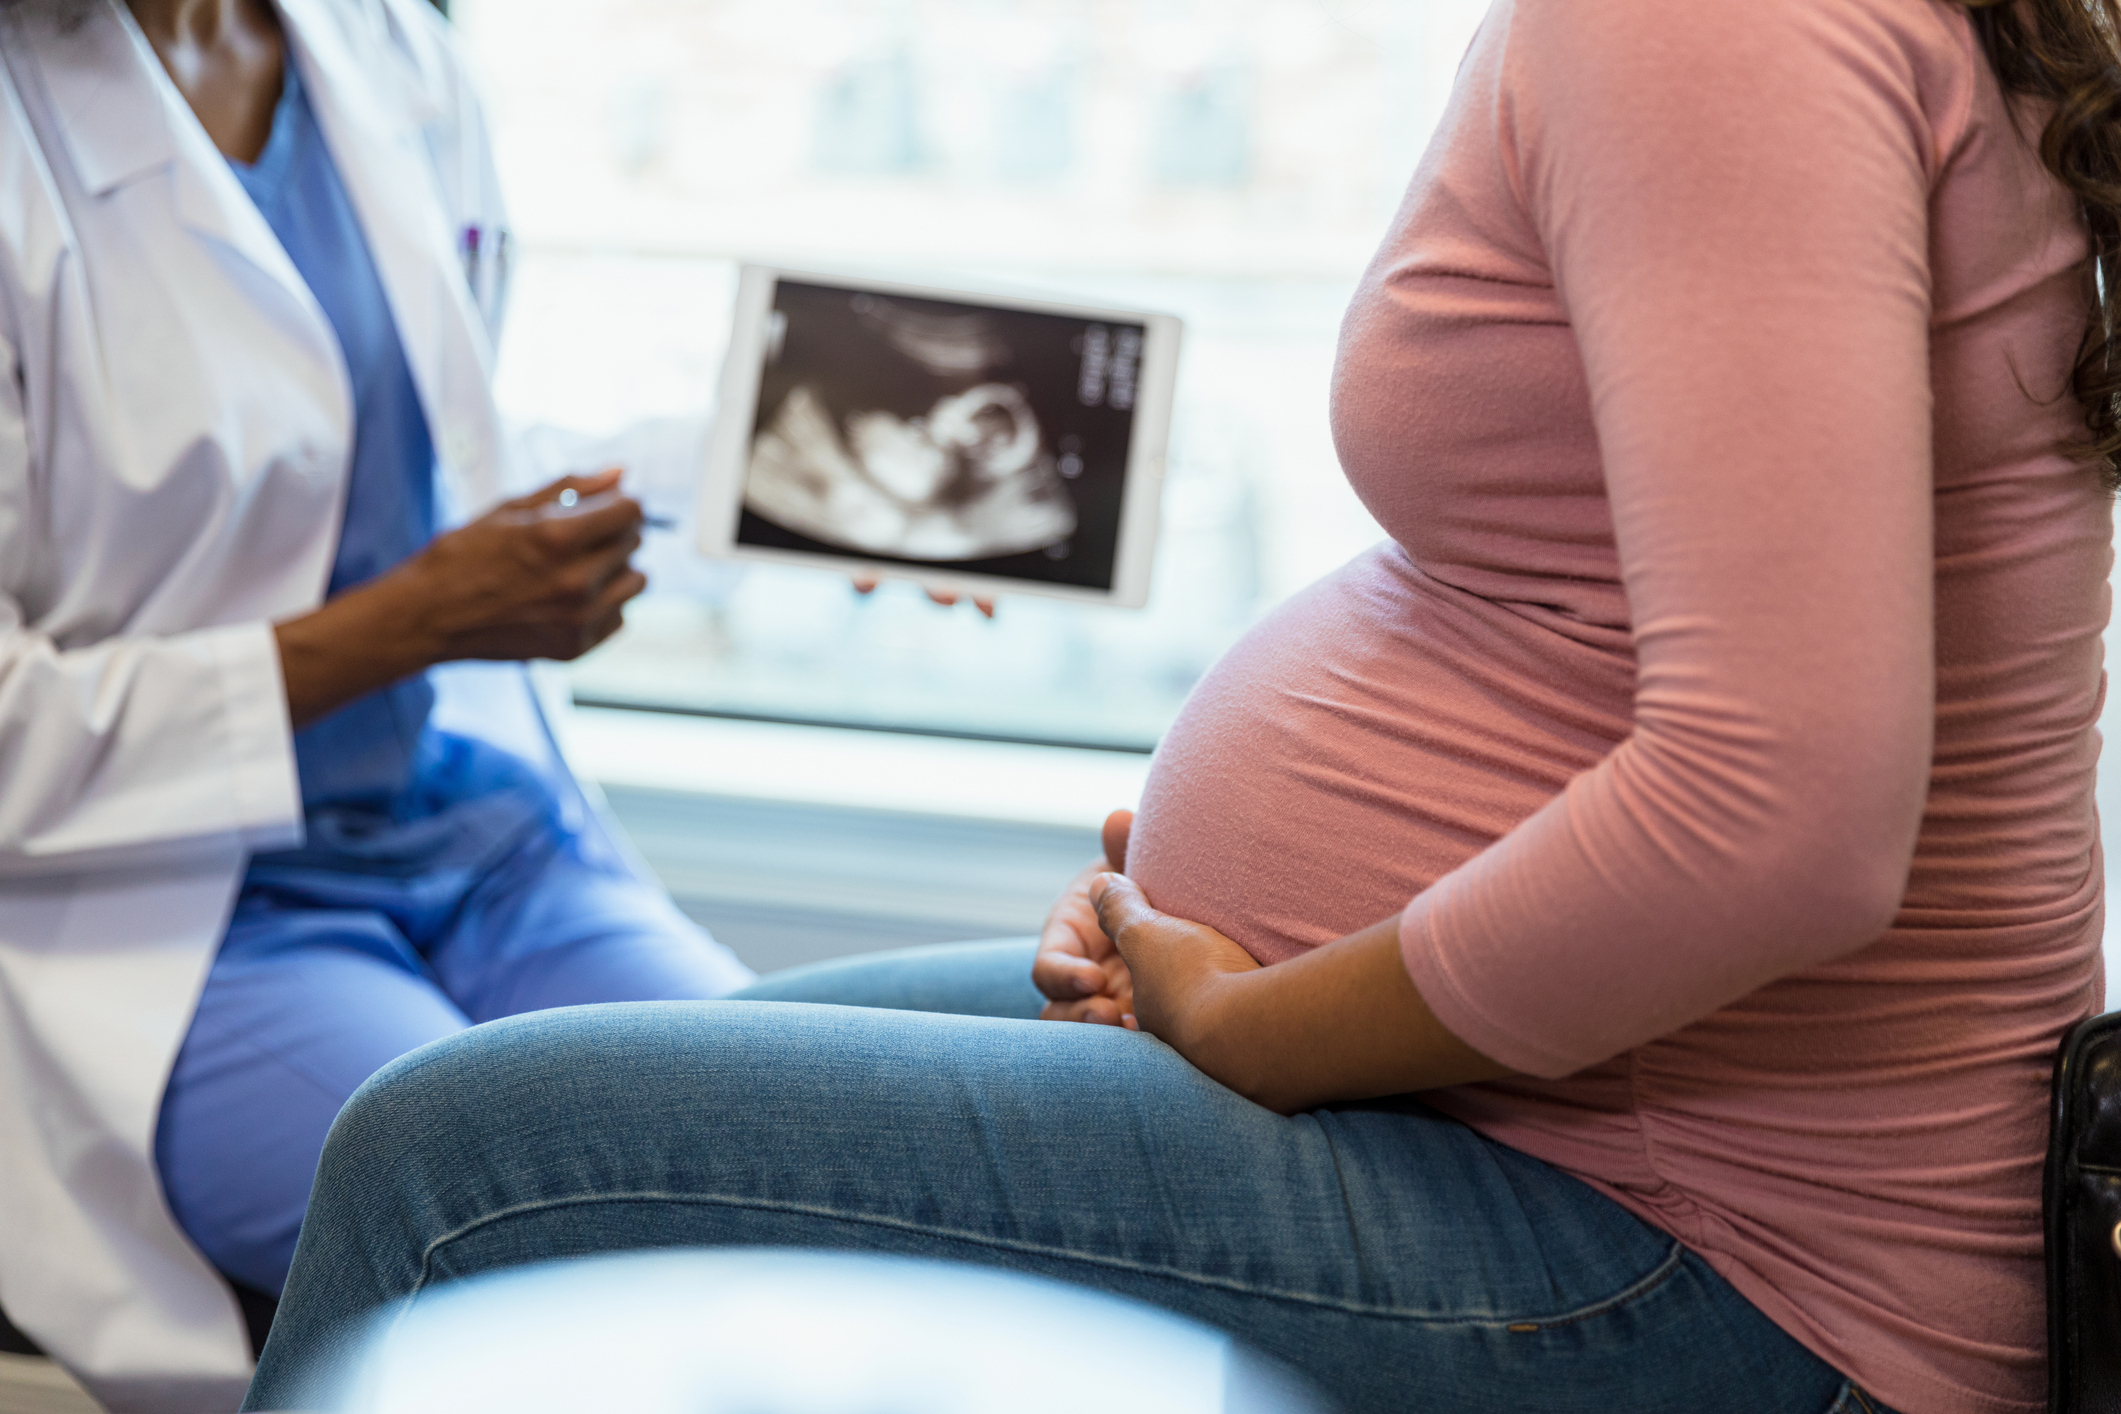 Pregnant person at a checkup with a doctor viewing an ultrasound